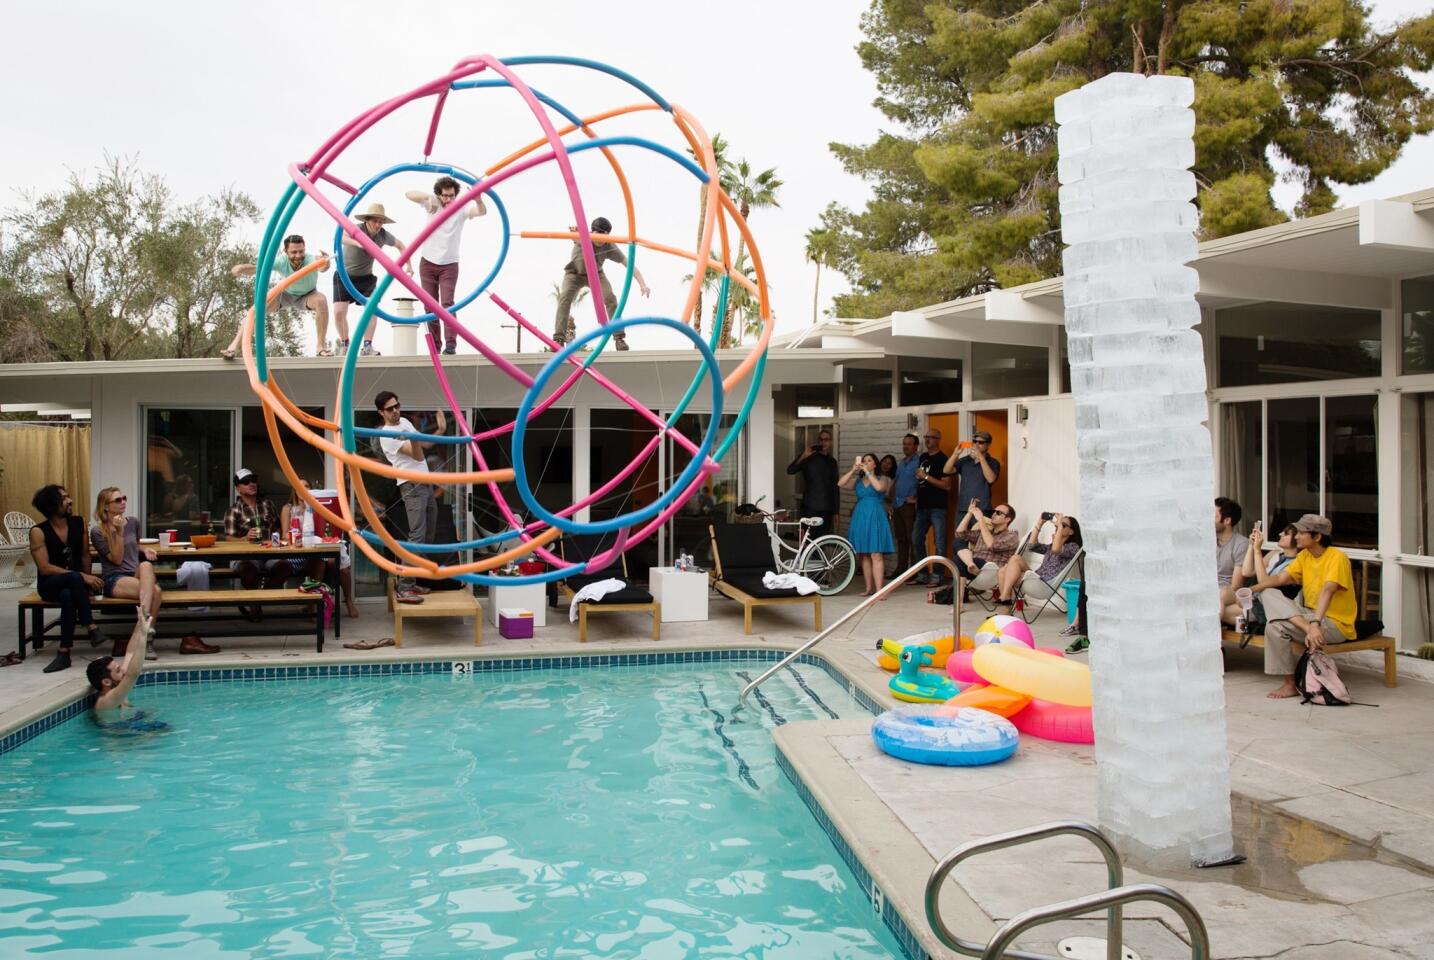 "Deep End," a wire-frame beach ball, launches into the pool at the Amado hotel in Palm Springs. A reinvention of Allan Kaprow's 1967 "Fluids" installation is at right.